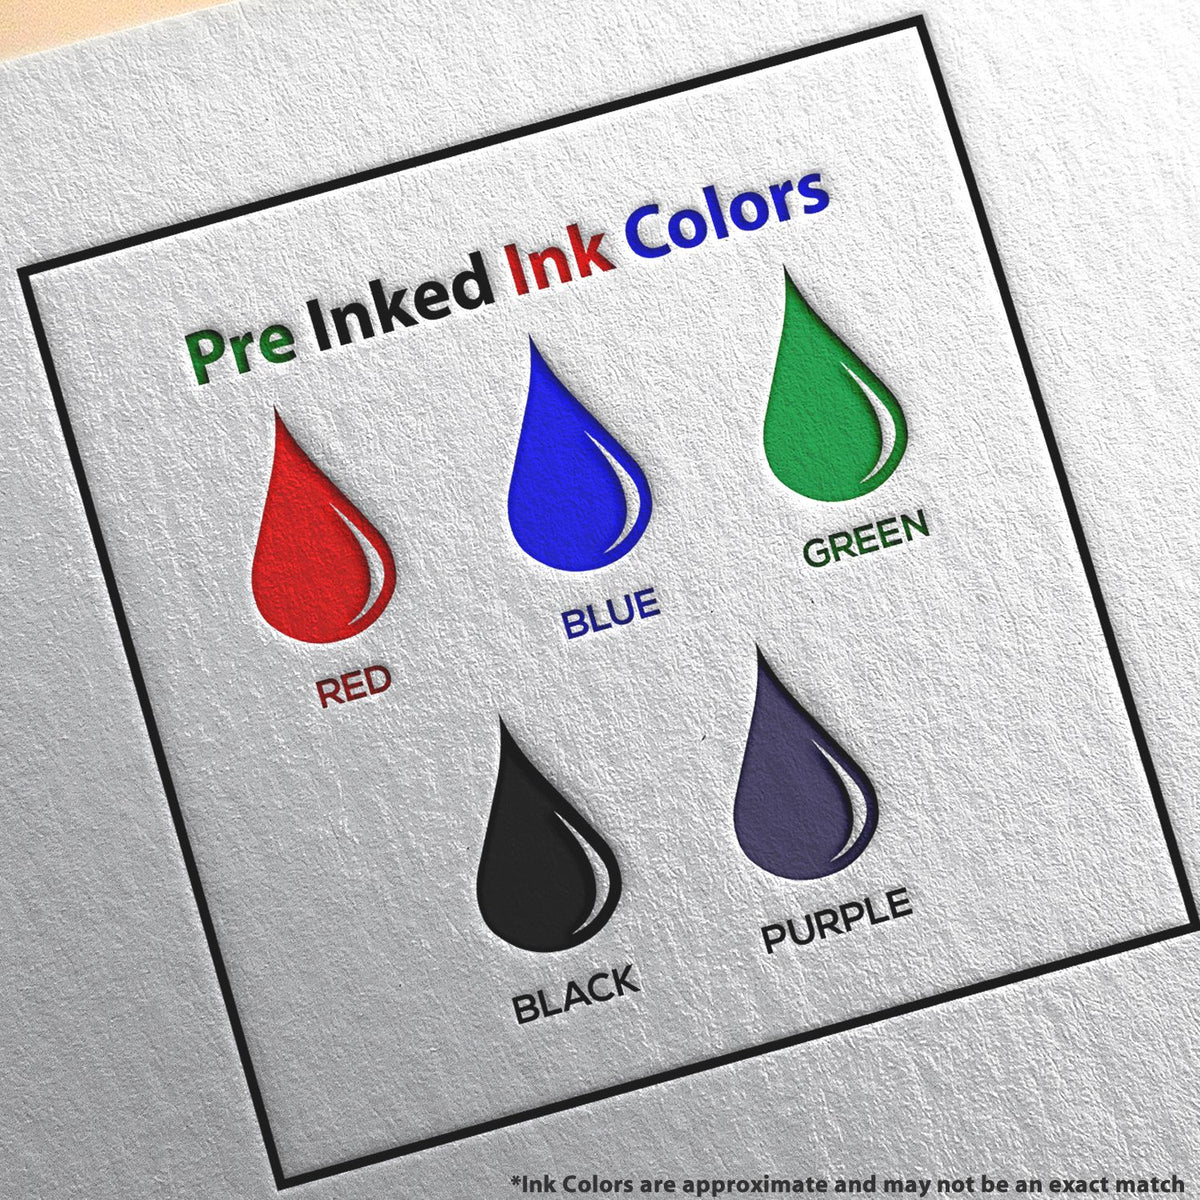 A picture showing the different ink colors or hues available for the Slim Pre-Inked Guam Land Surveyor Seal Stamp product.